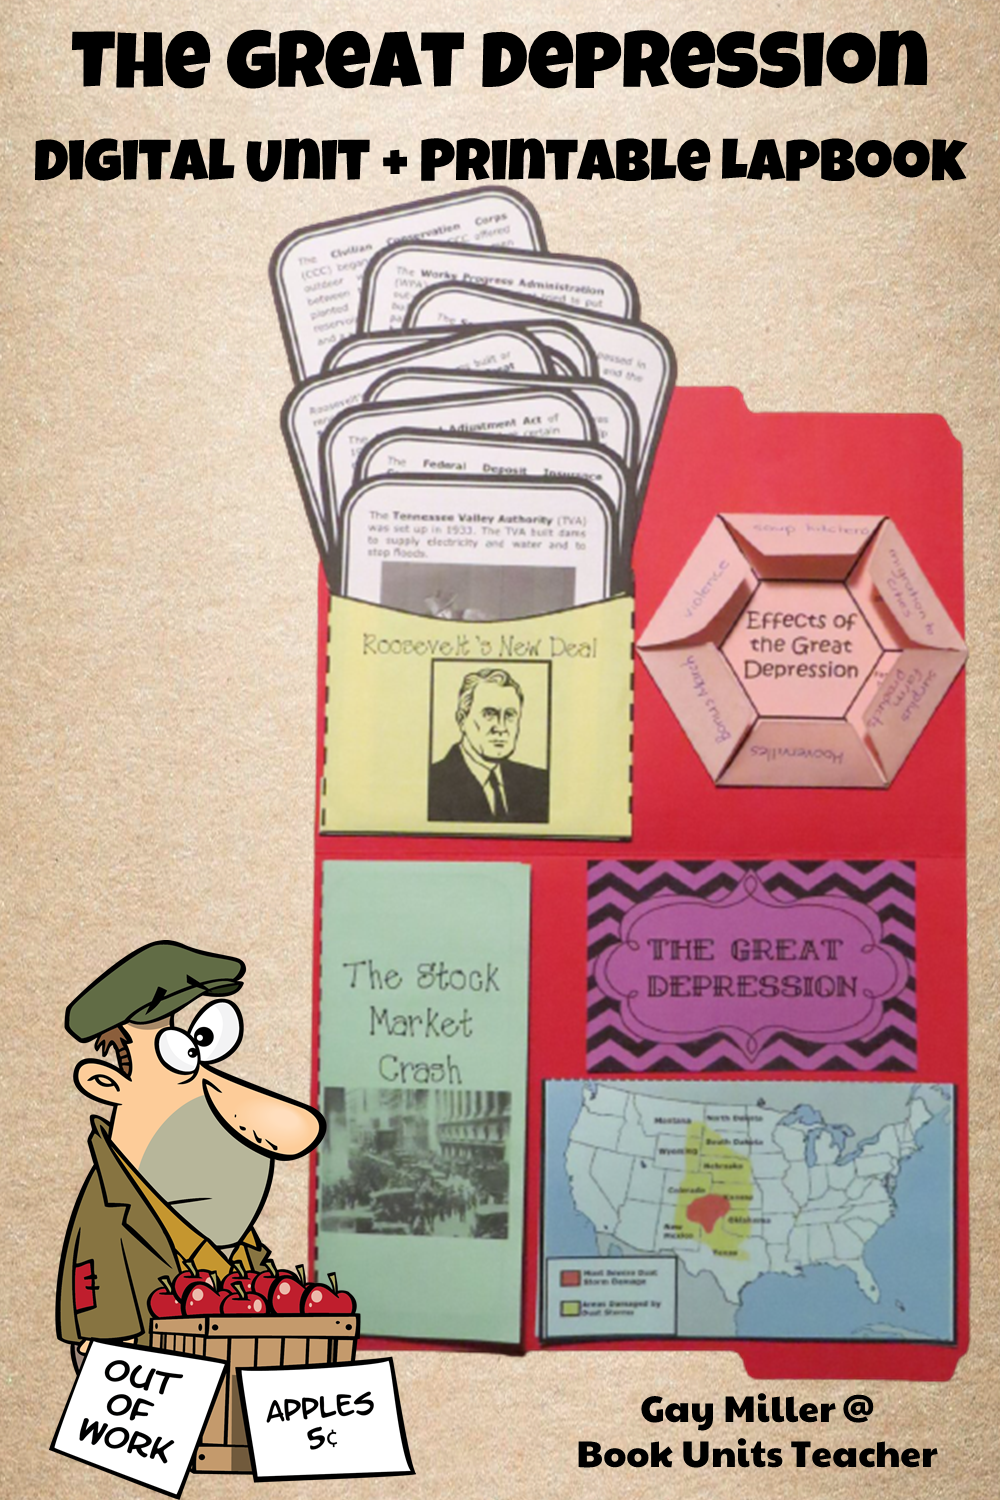 Purchase The Great Depression + World War II Lapbook on Teachers Pay Teachers. This activity is great for upper elementary including 4th, 5th, and 6th graders.